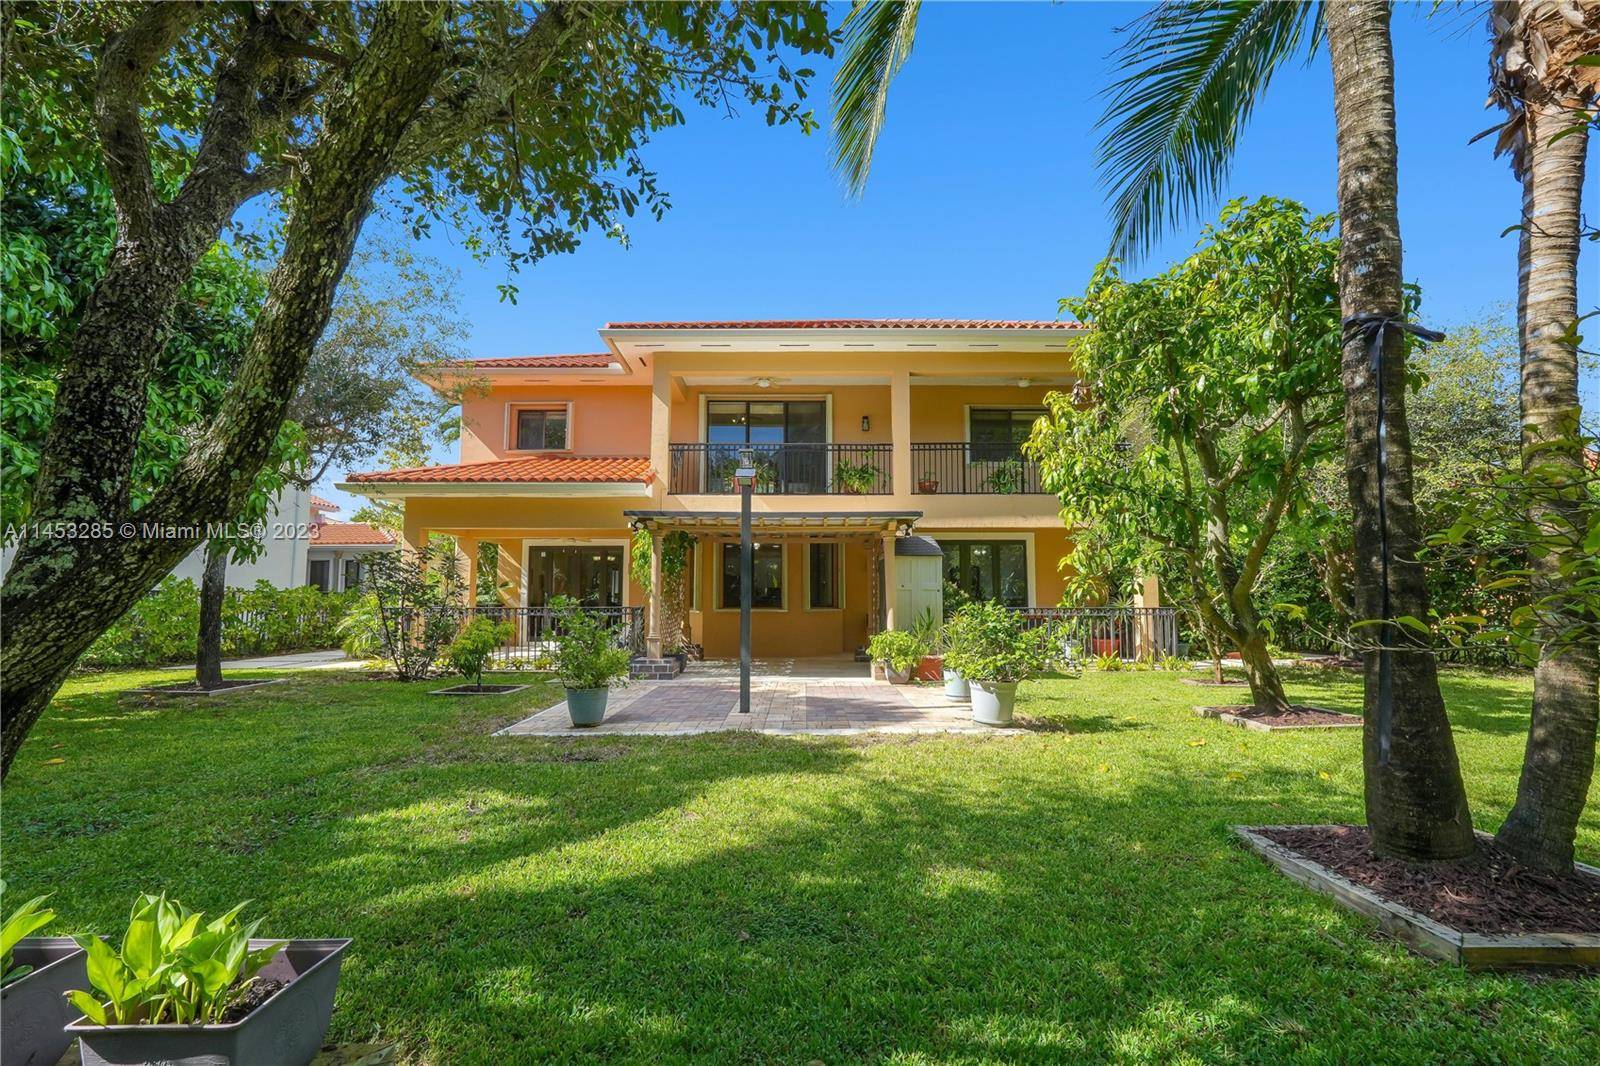 An opportunity awaits in Cutler Cay !